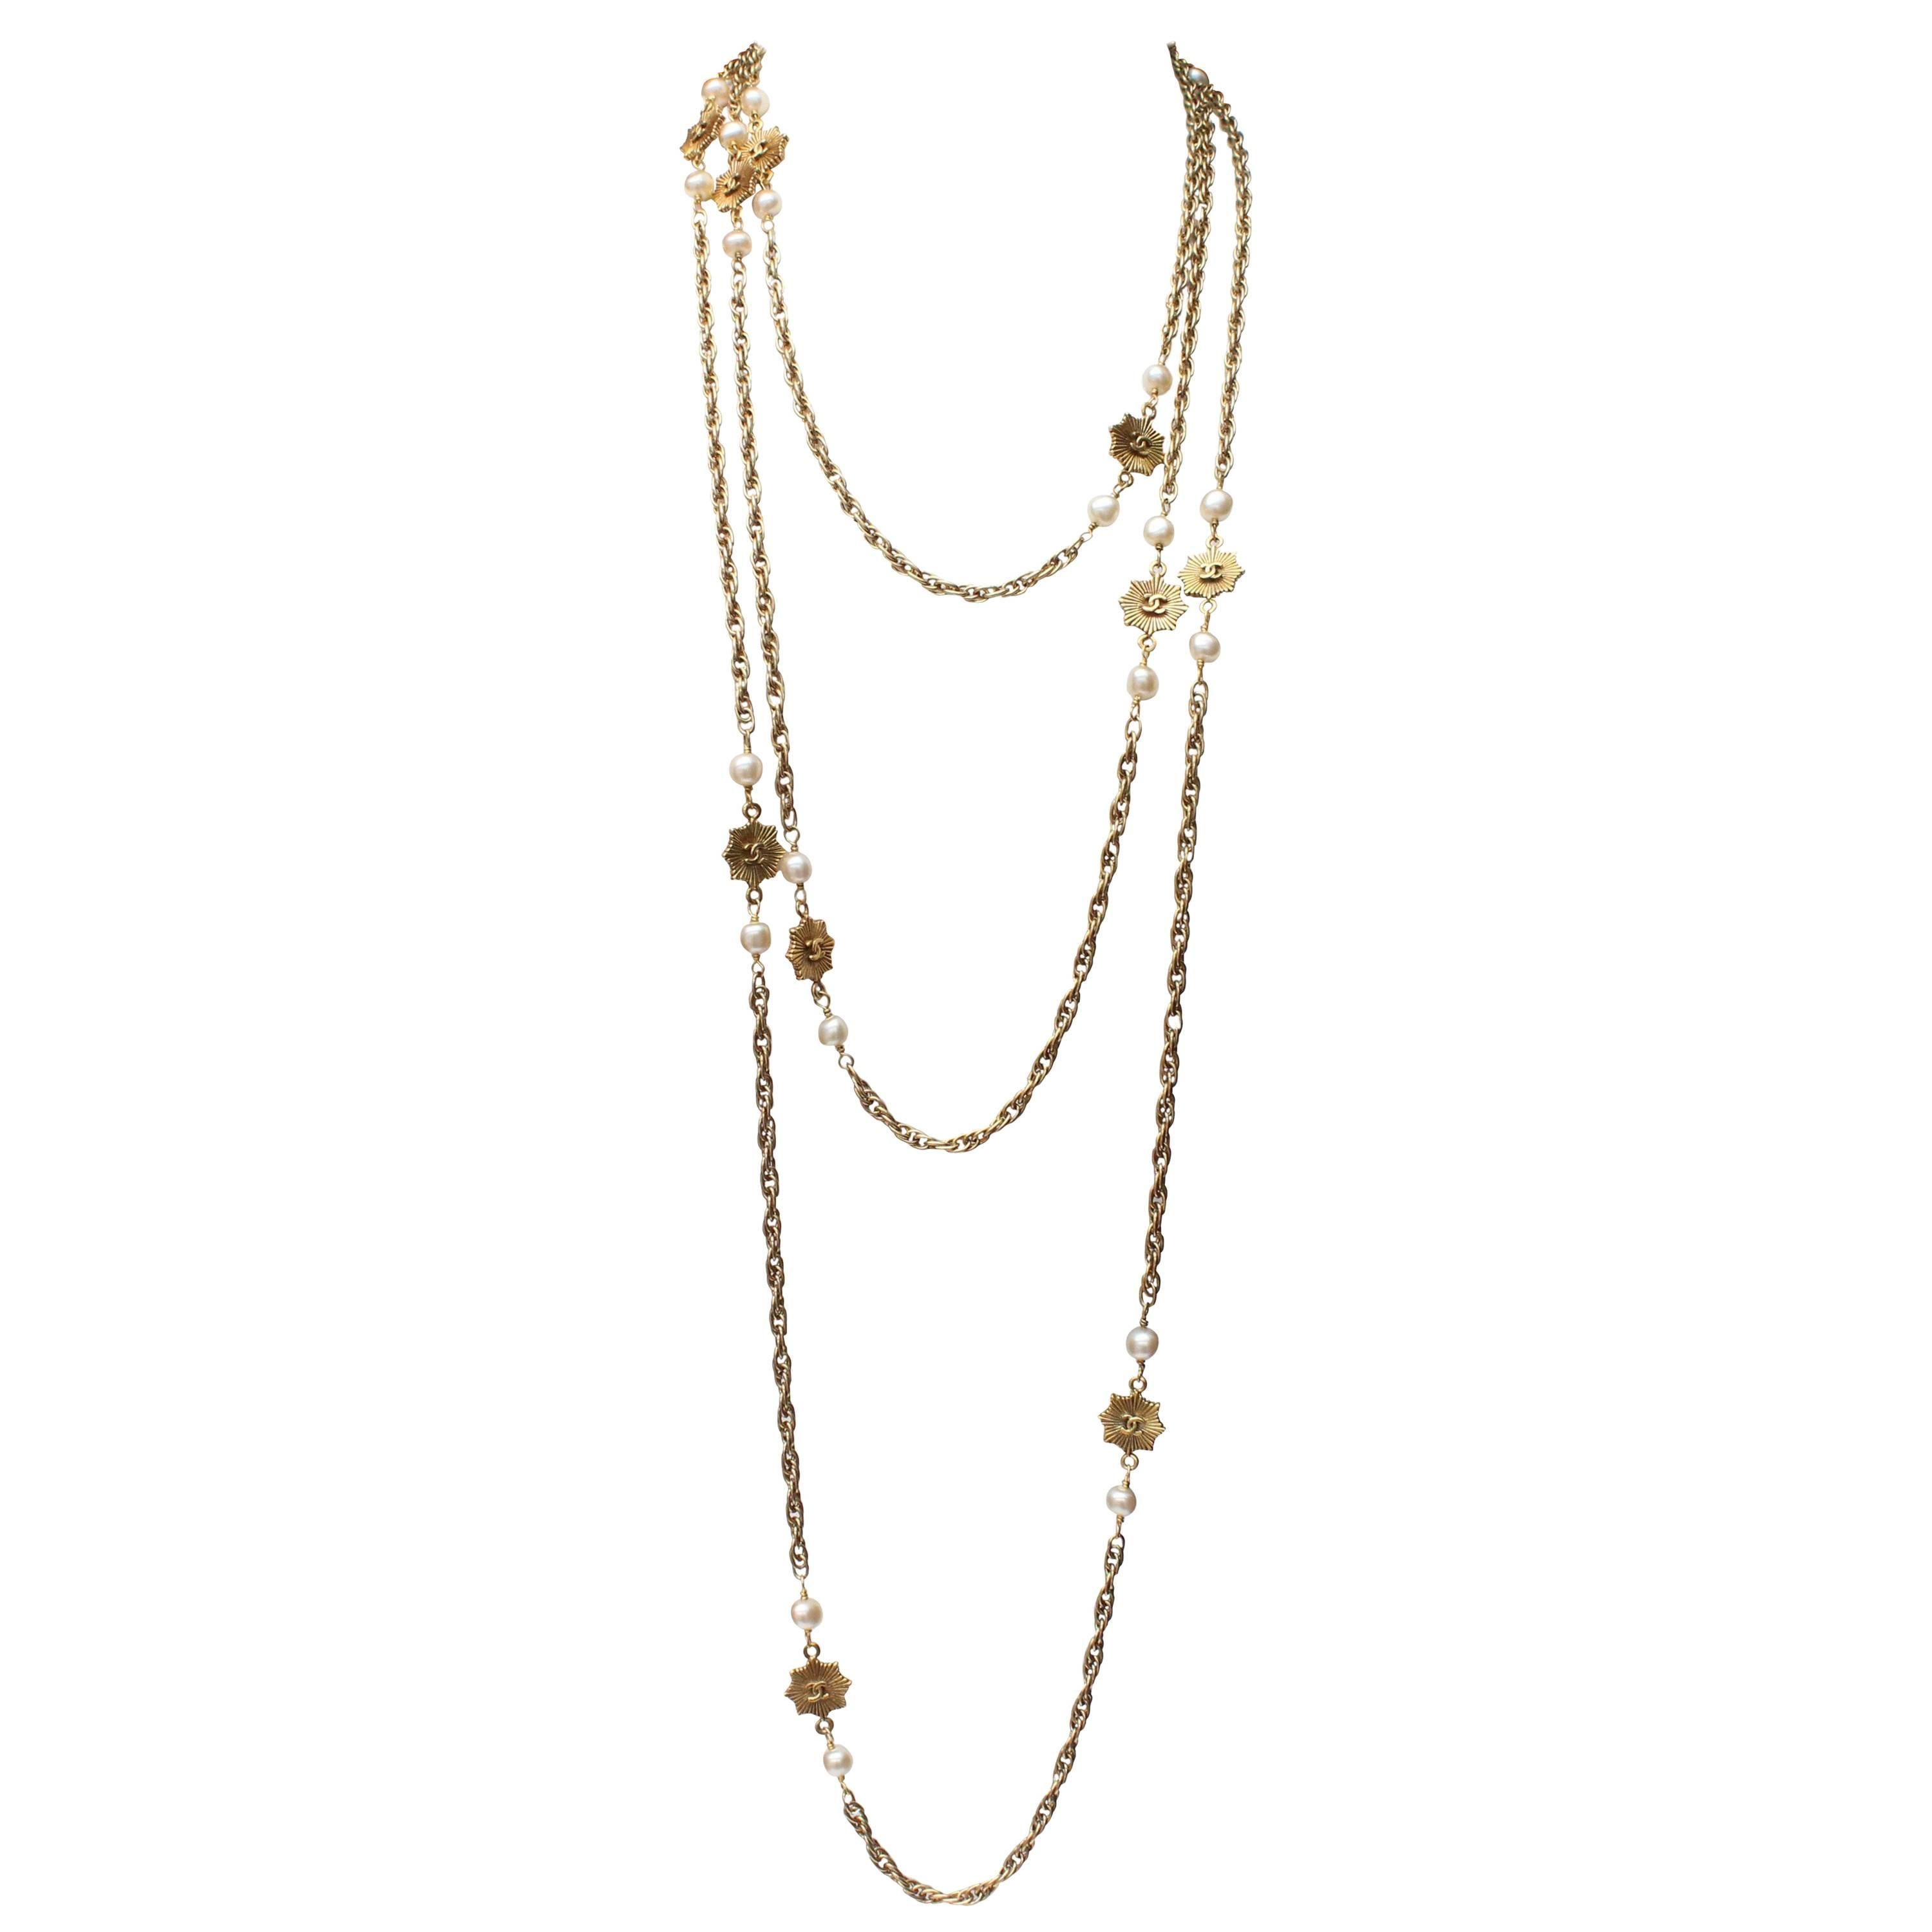 1984 Chanel gilded metal long sautoir with stars and pearly beads